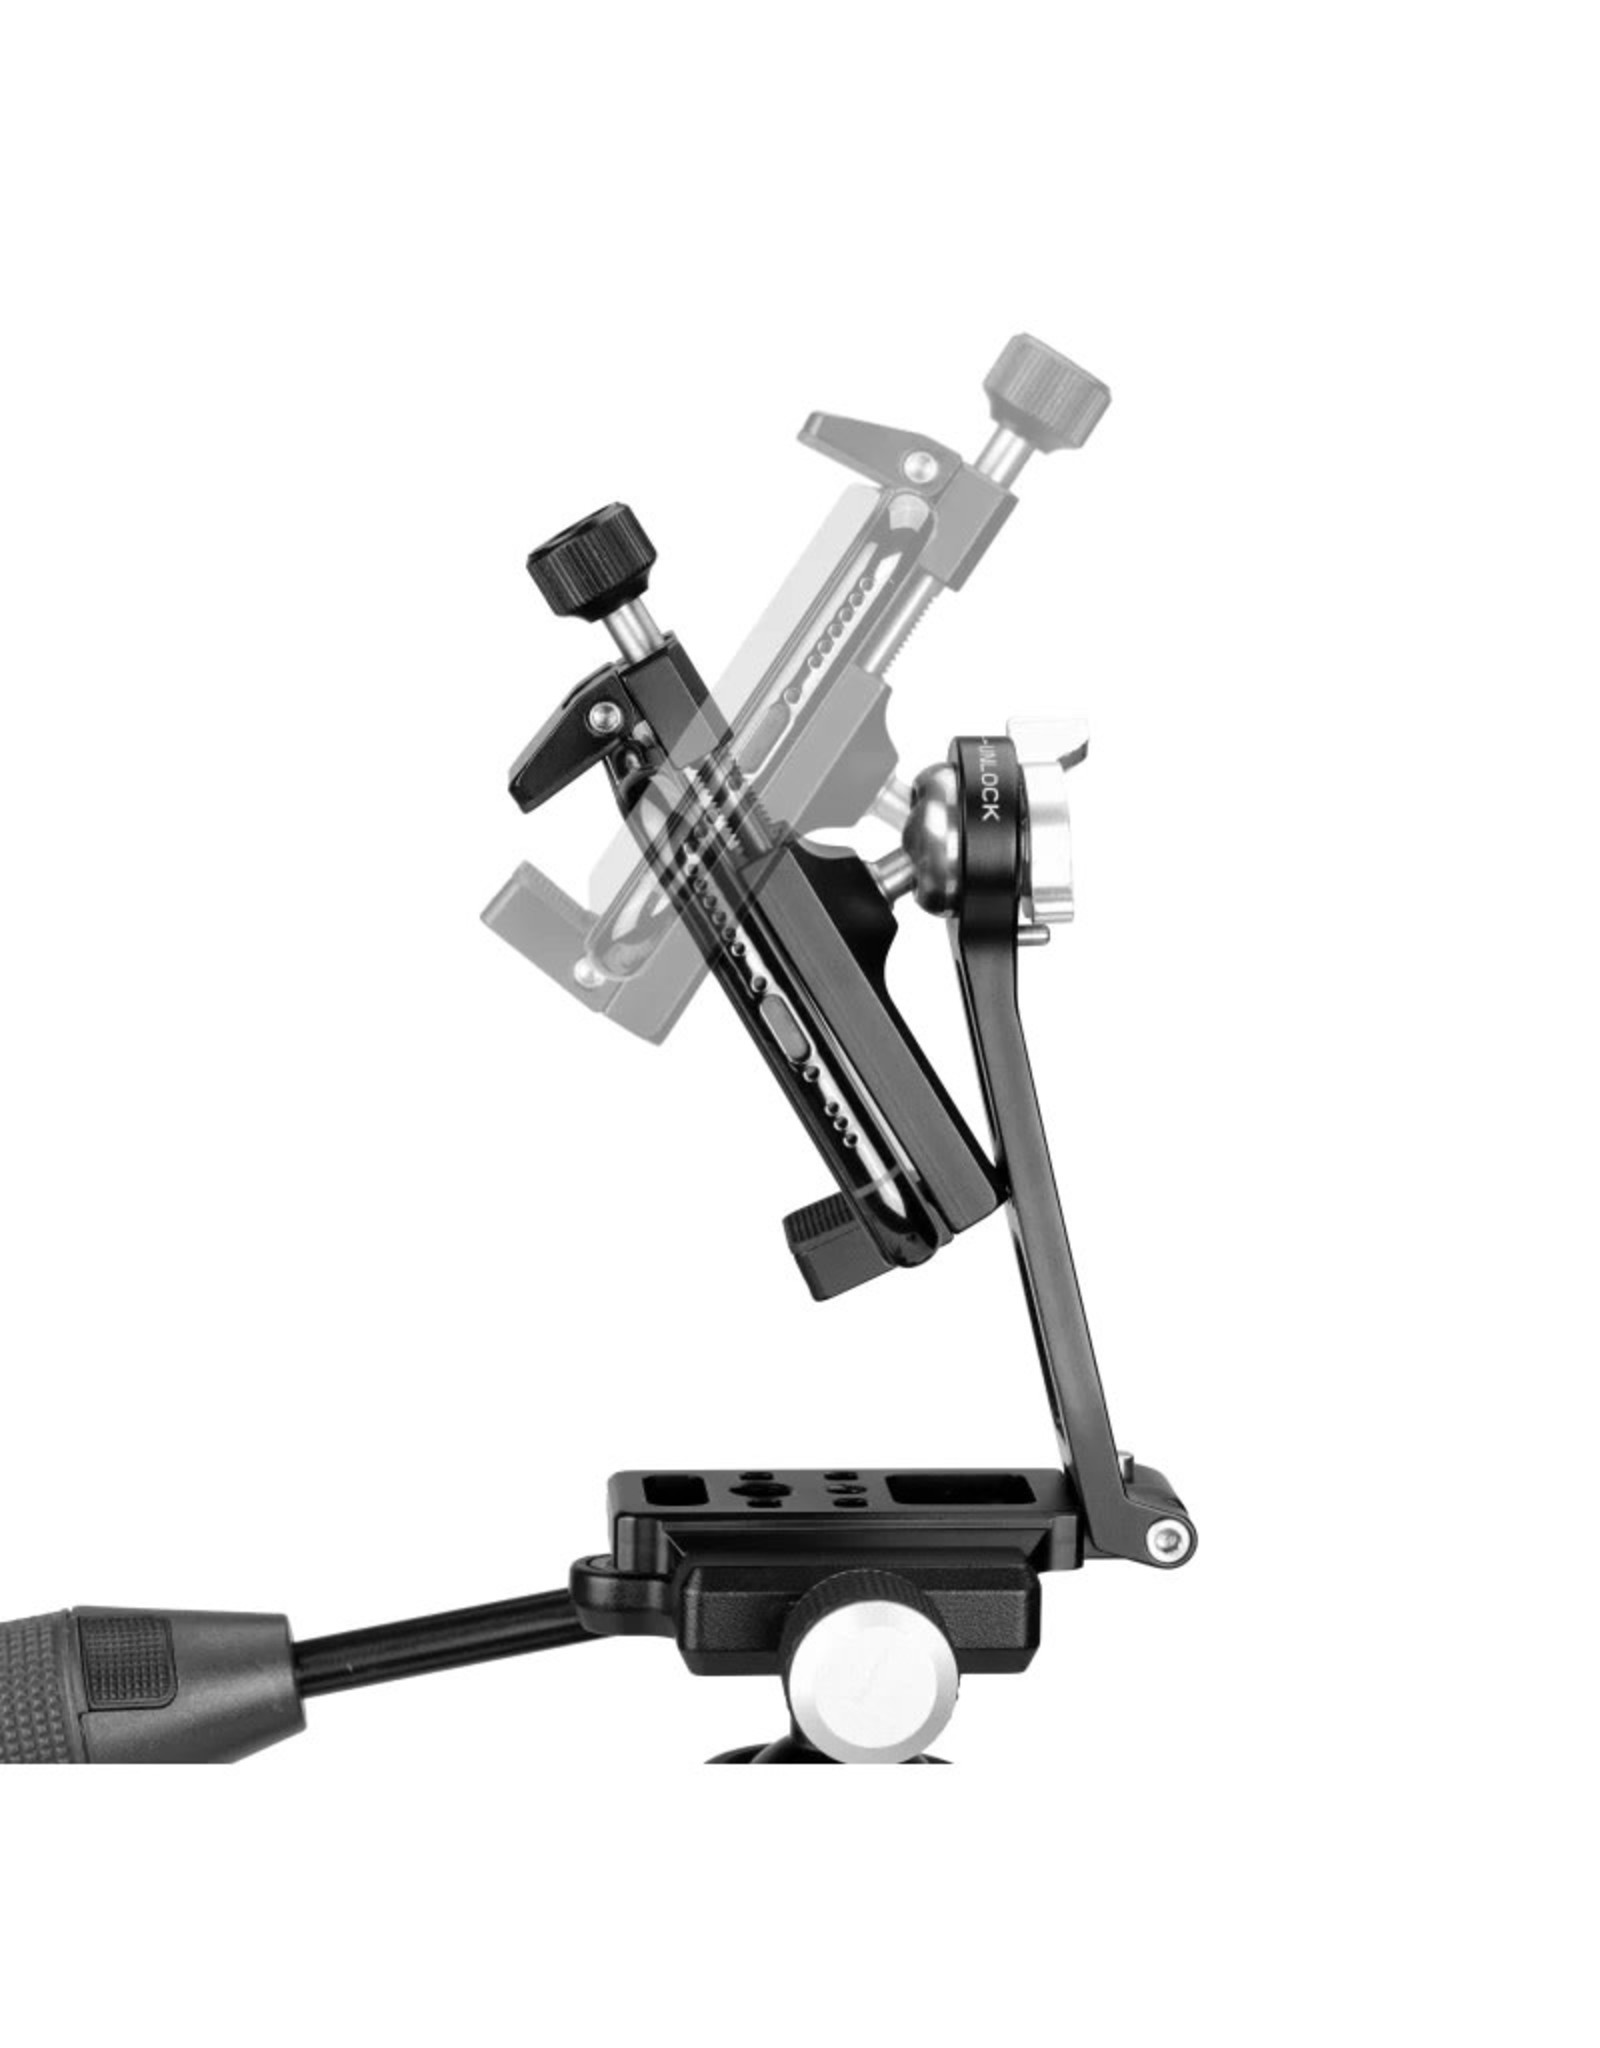 Vanguard VEO CP-46 KIT W/ CLAMP, DELUXE SUPPORT ARM & SMARTPHONE HOLDER